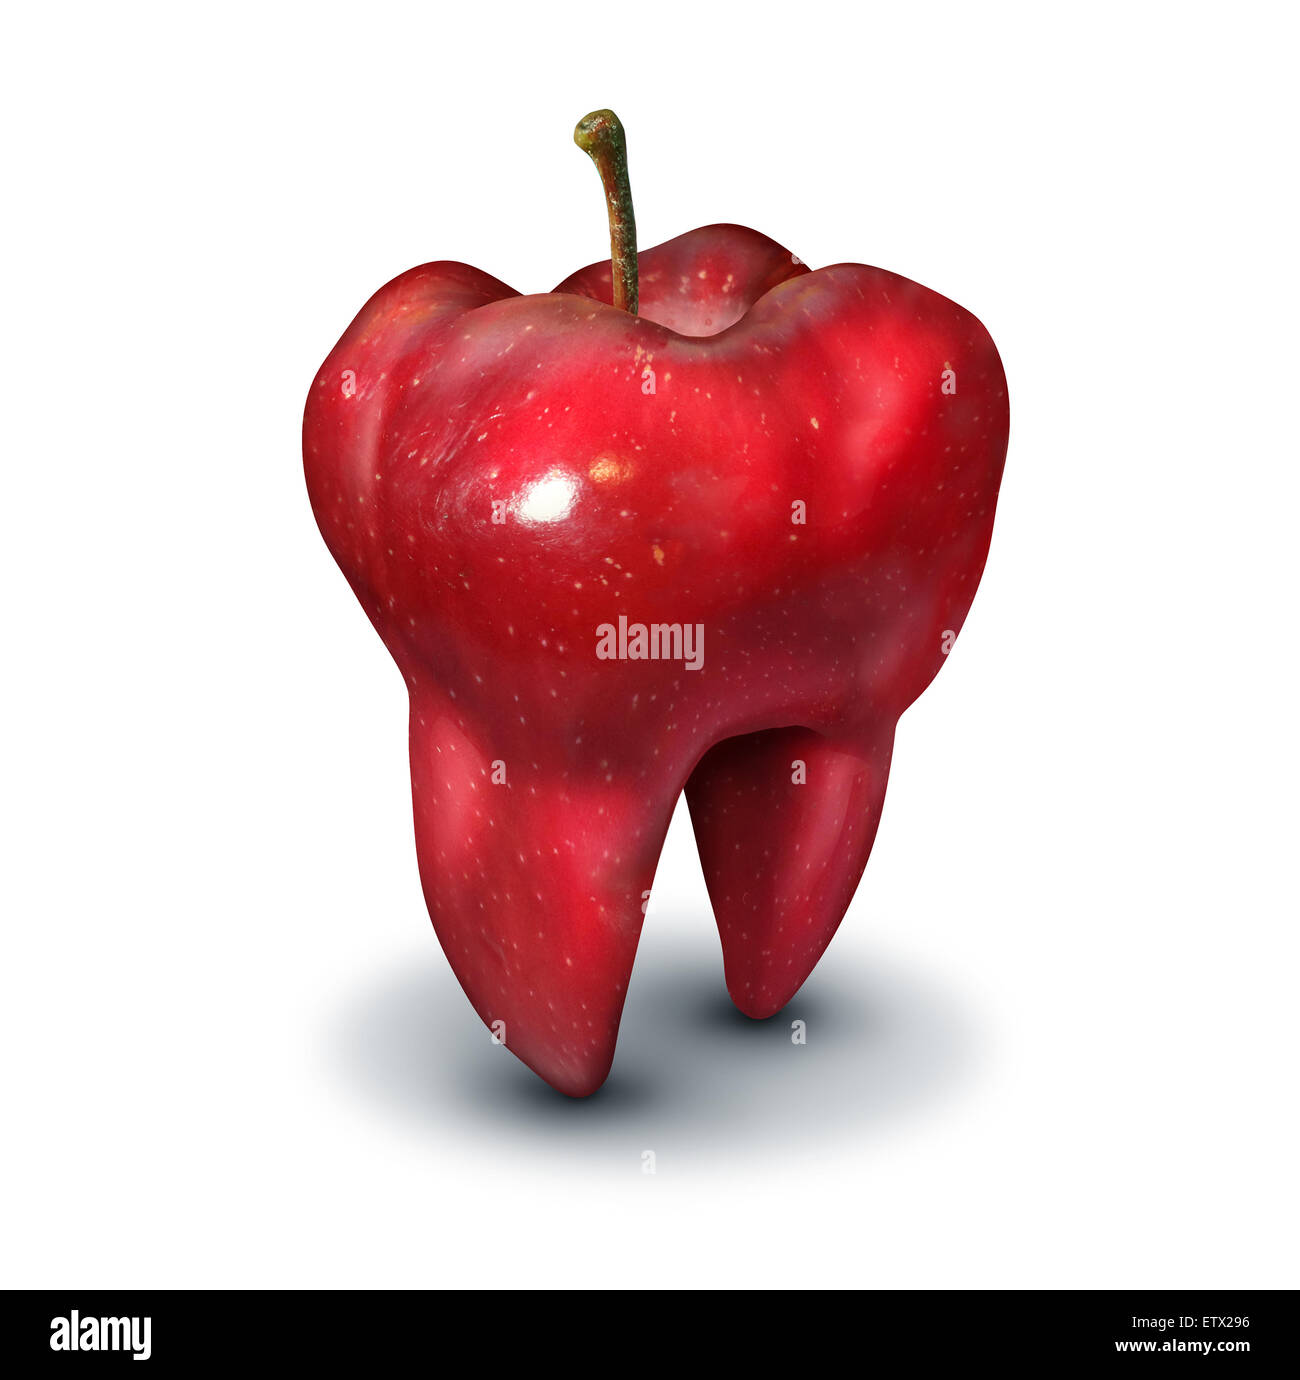 Apple tooth health concept as a red fruit shaped as a molar and symbol of human teeth health and oral hygiene or dentistry icon Stock Photo